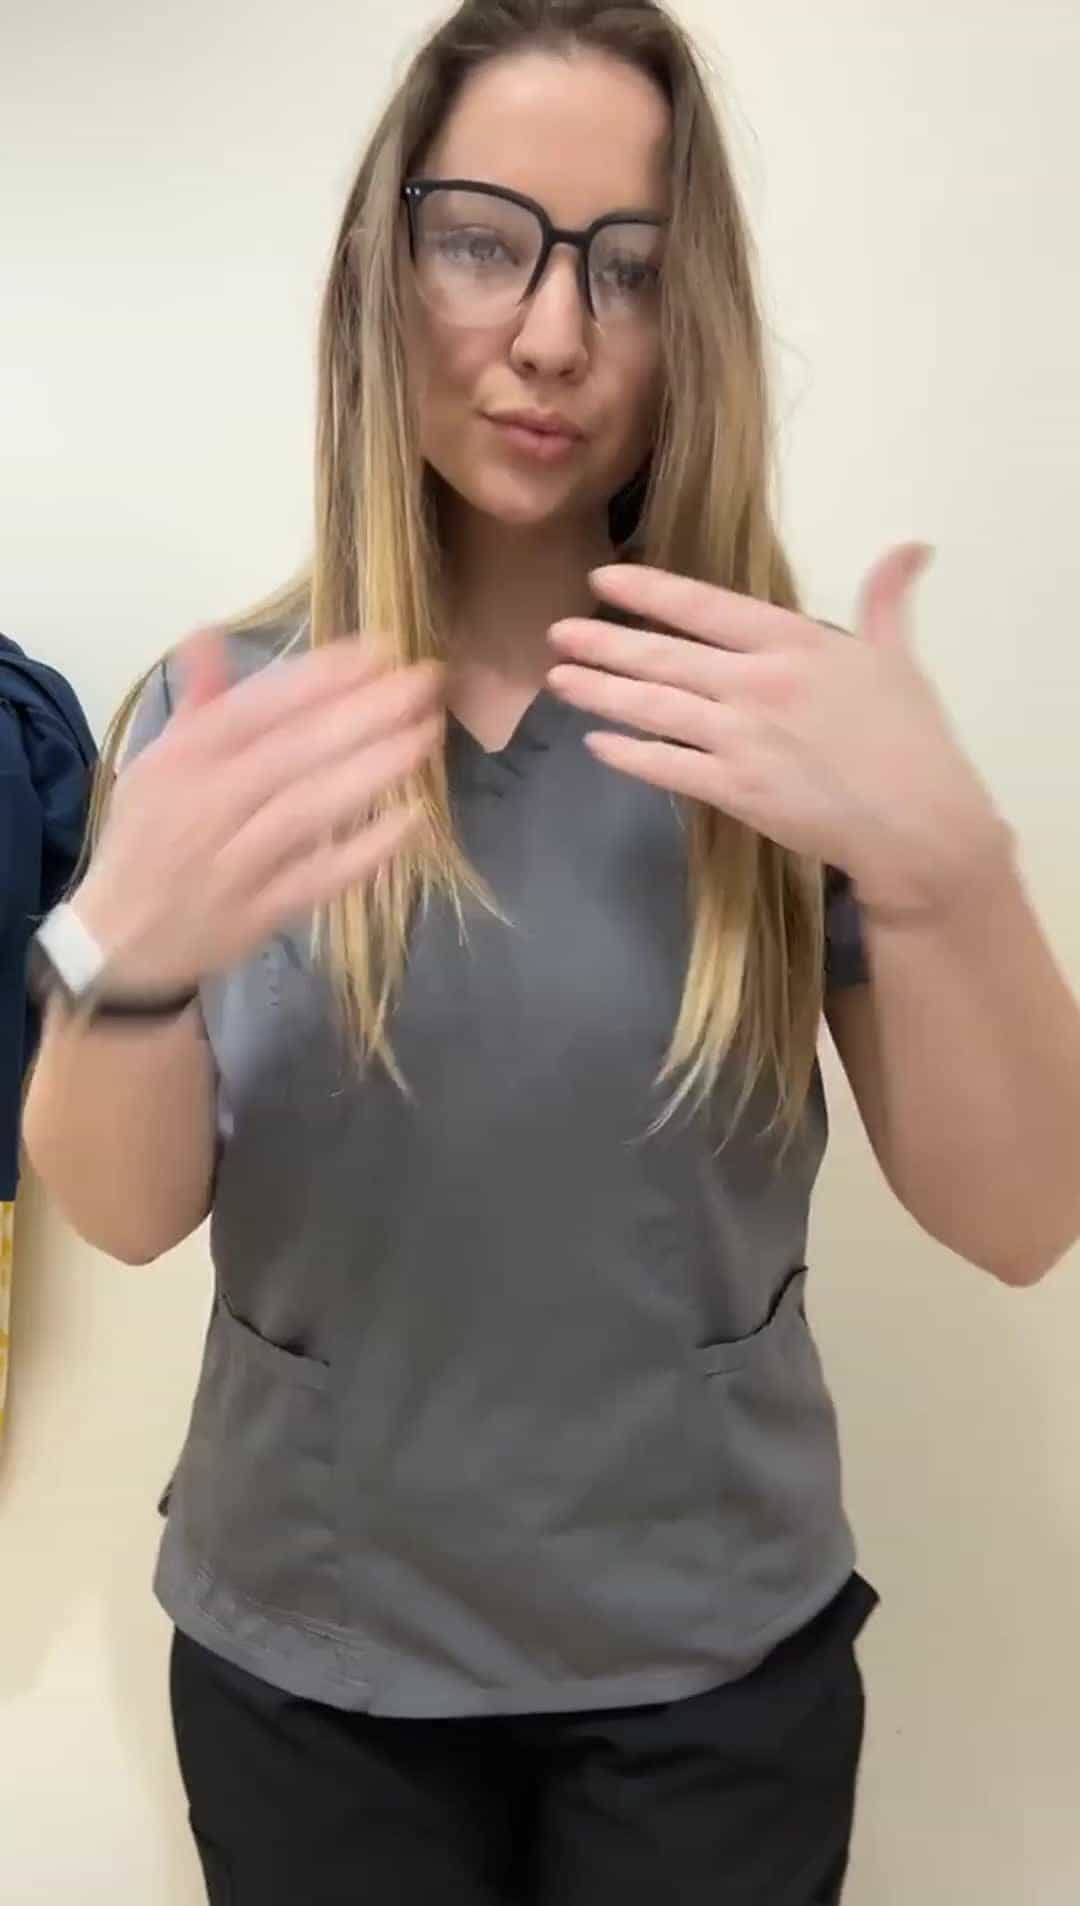 Any chance you’d tittyfuck this fuckdoll on a first date👩‍⚕️